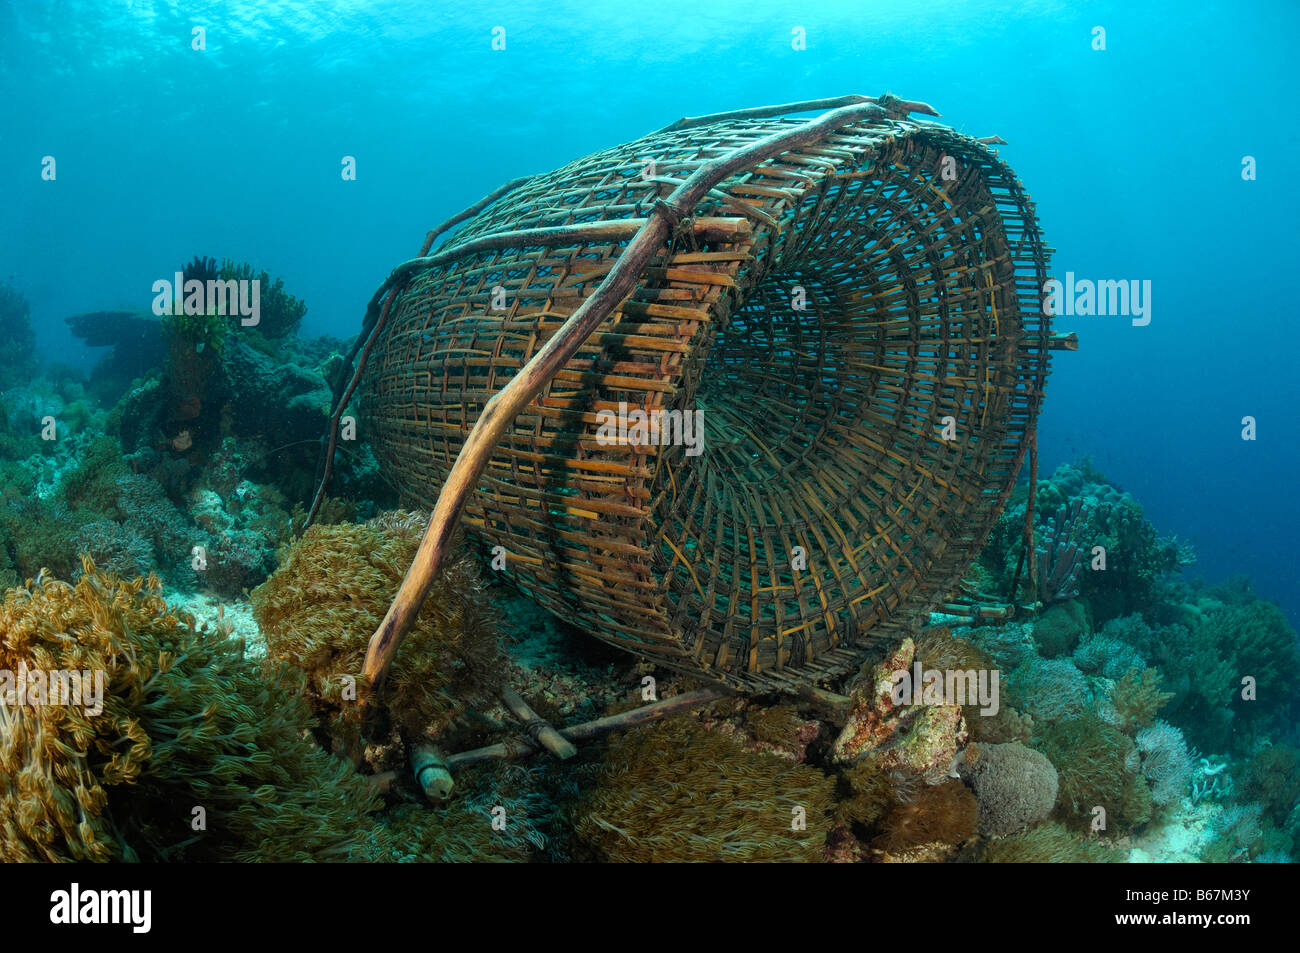 2,630 Underwater Fish Trap Images, Stock Photos, 3D objects